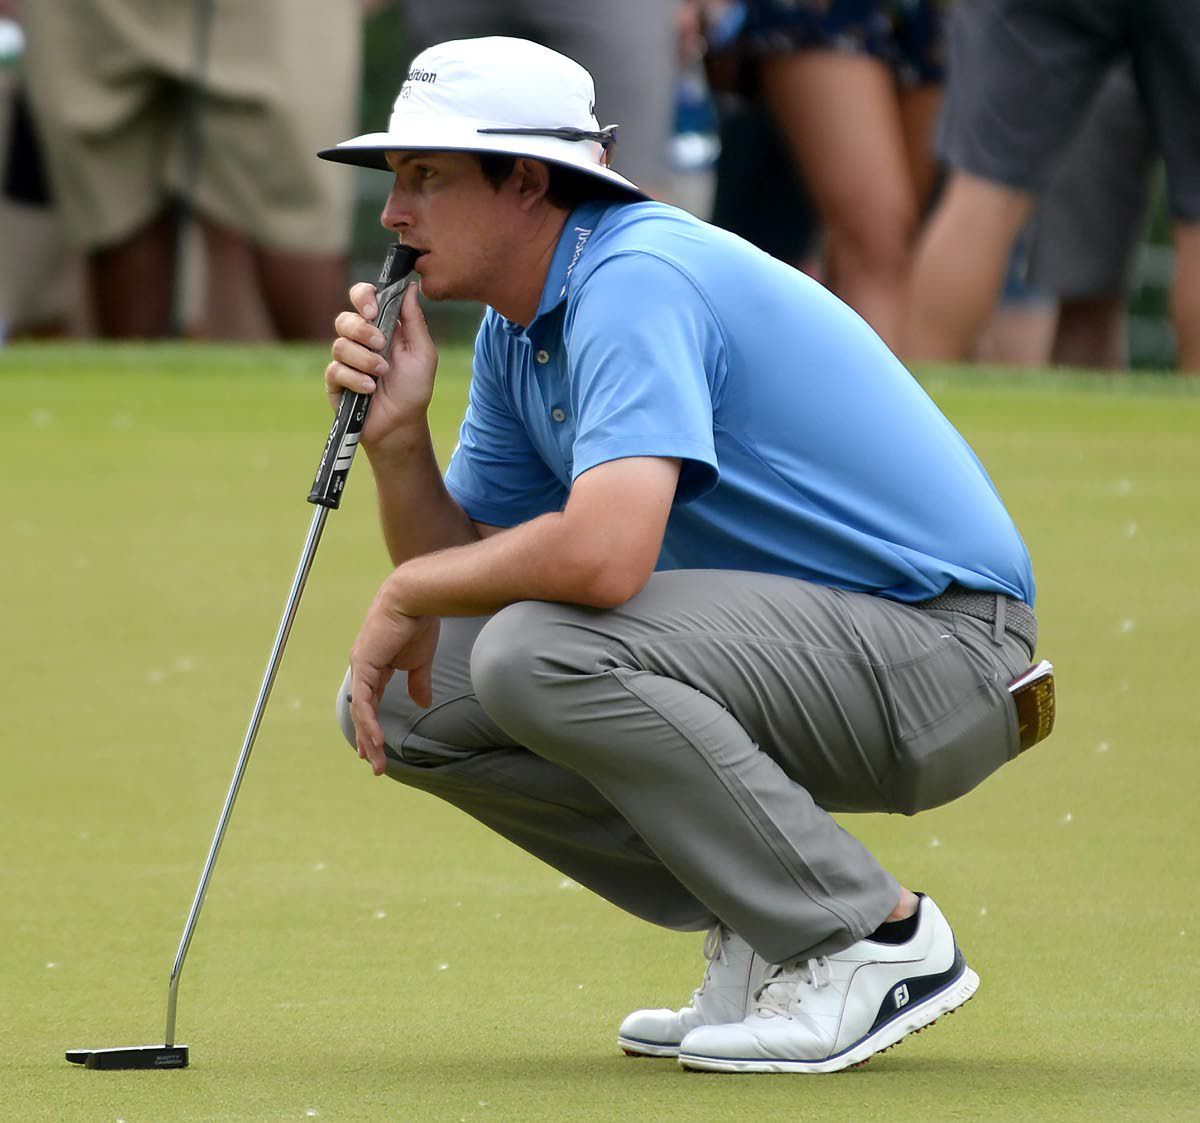 Rory McIlroy flops to lose Wells Fargo Championship to Max Horna who  improved his golf after reading selfhelp books  The Sun